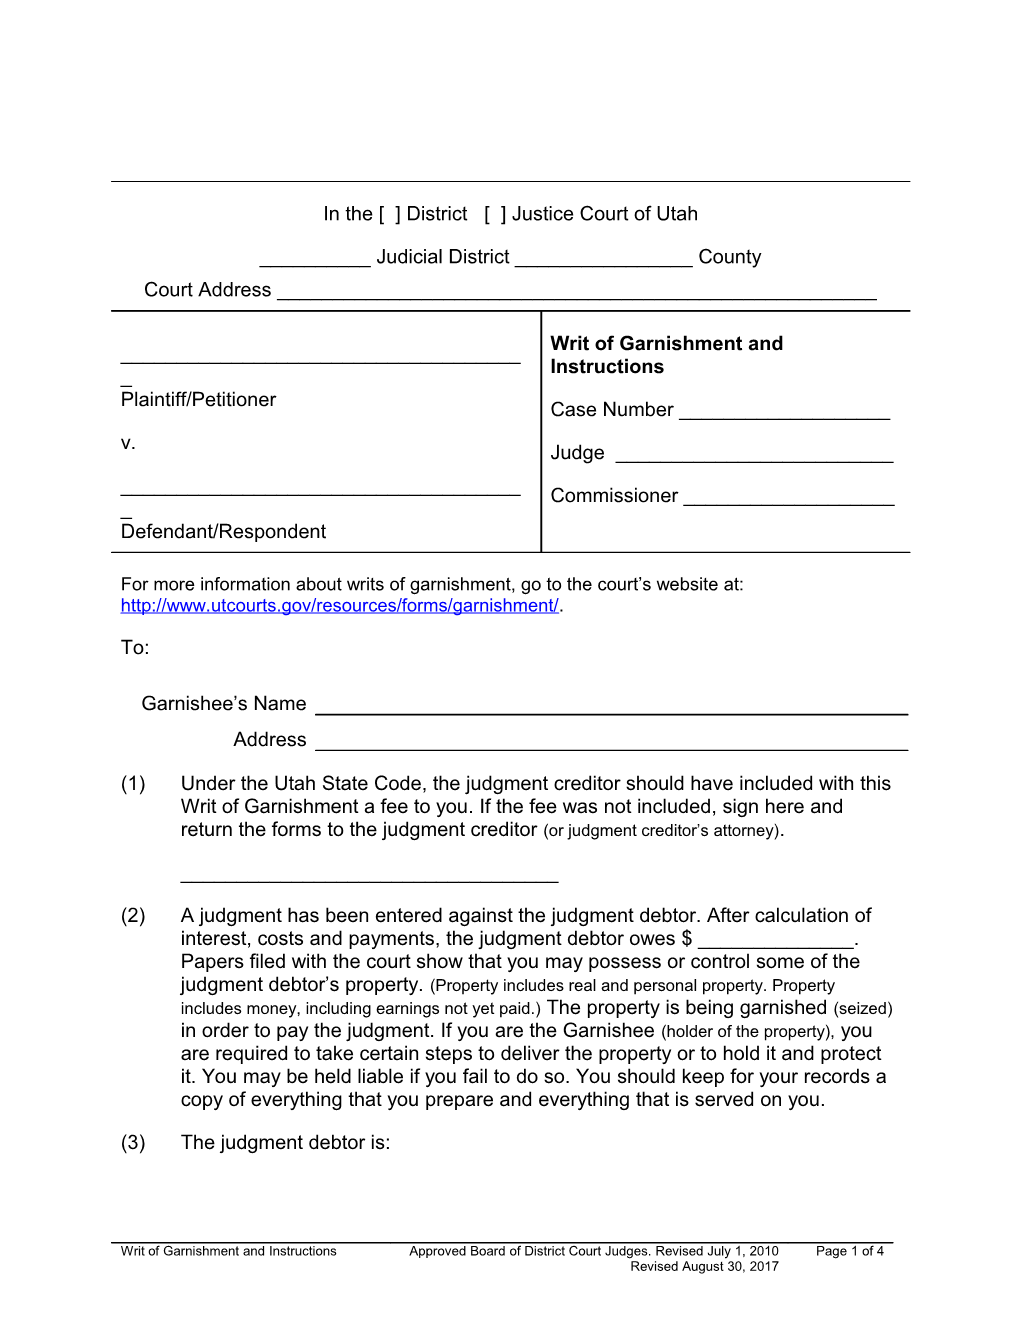 Writ of Garnishment and Instructions s1